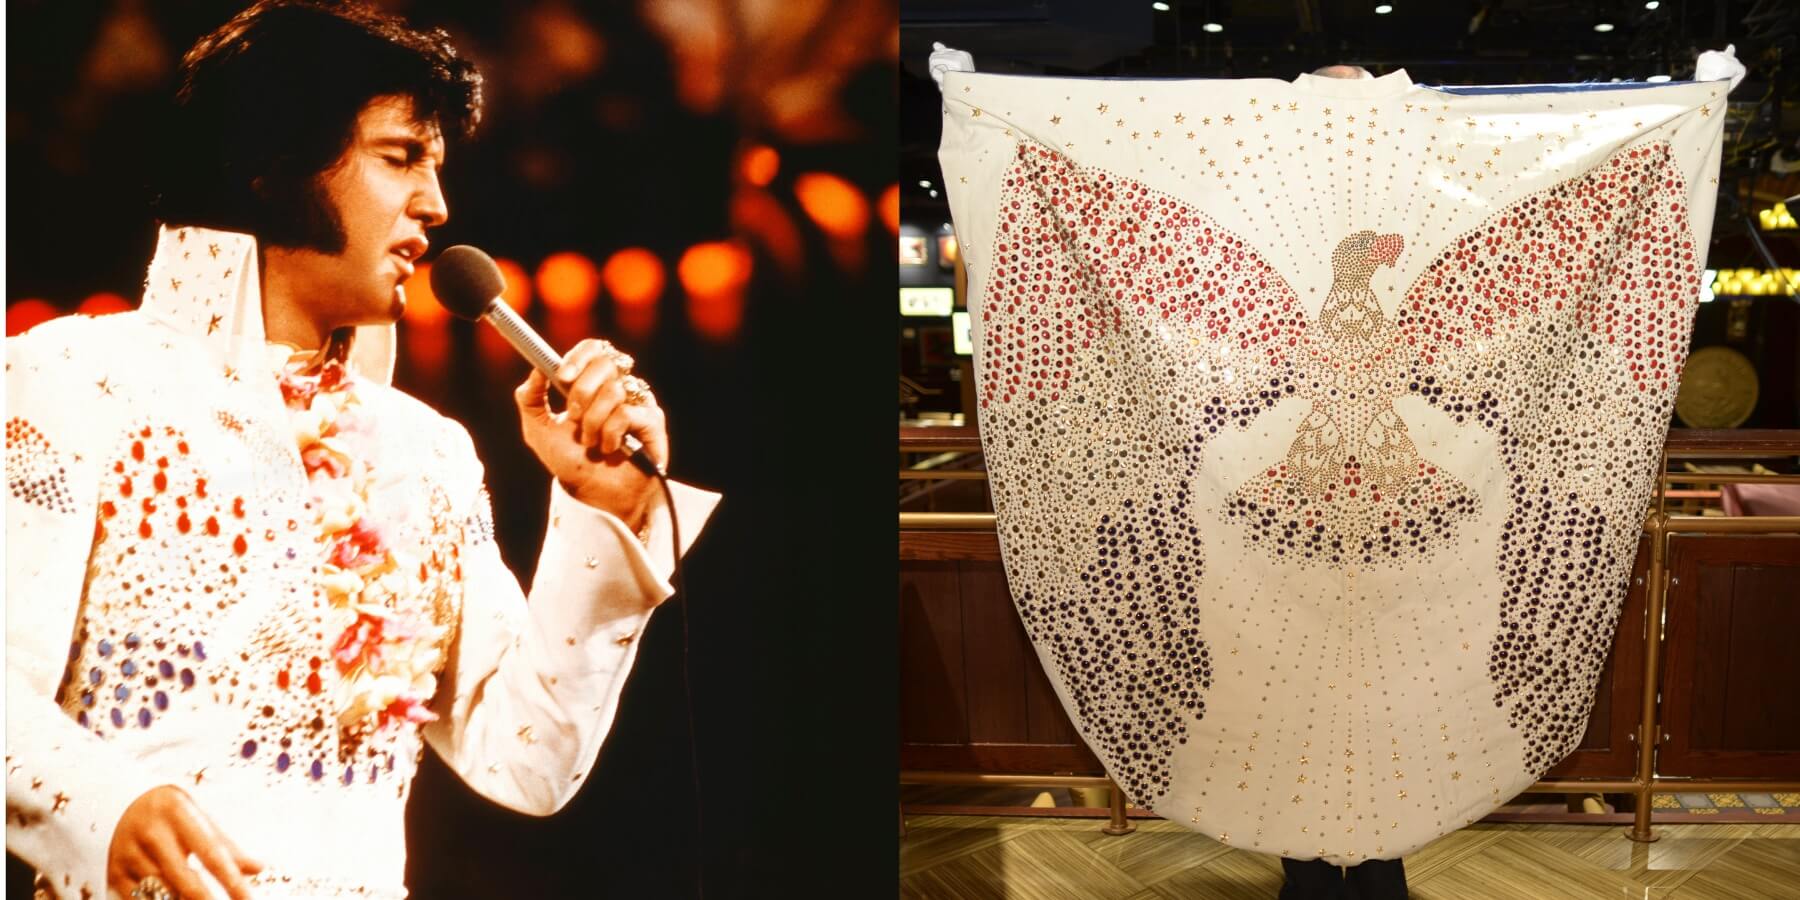 Elvis Presley in a side-by-side photo with his American Eagle Cape, which he wore in Hawaii